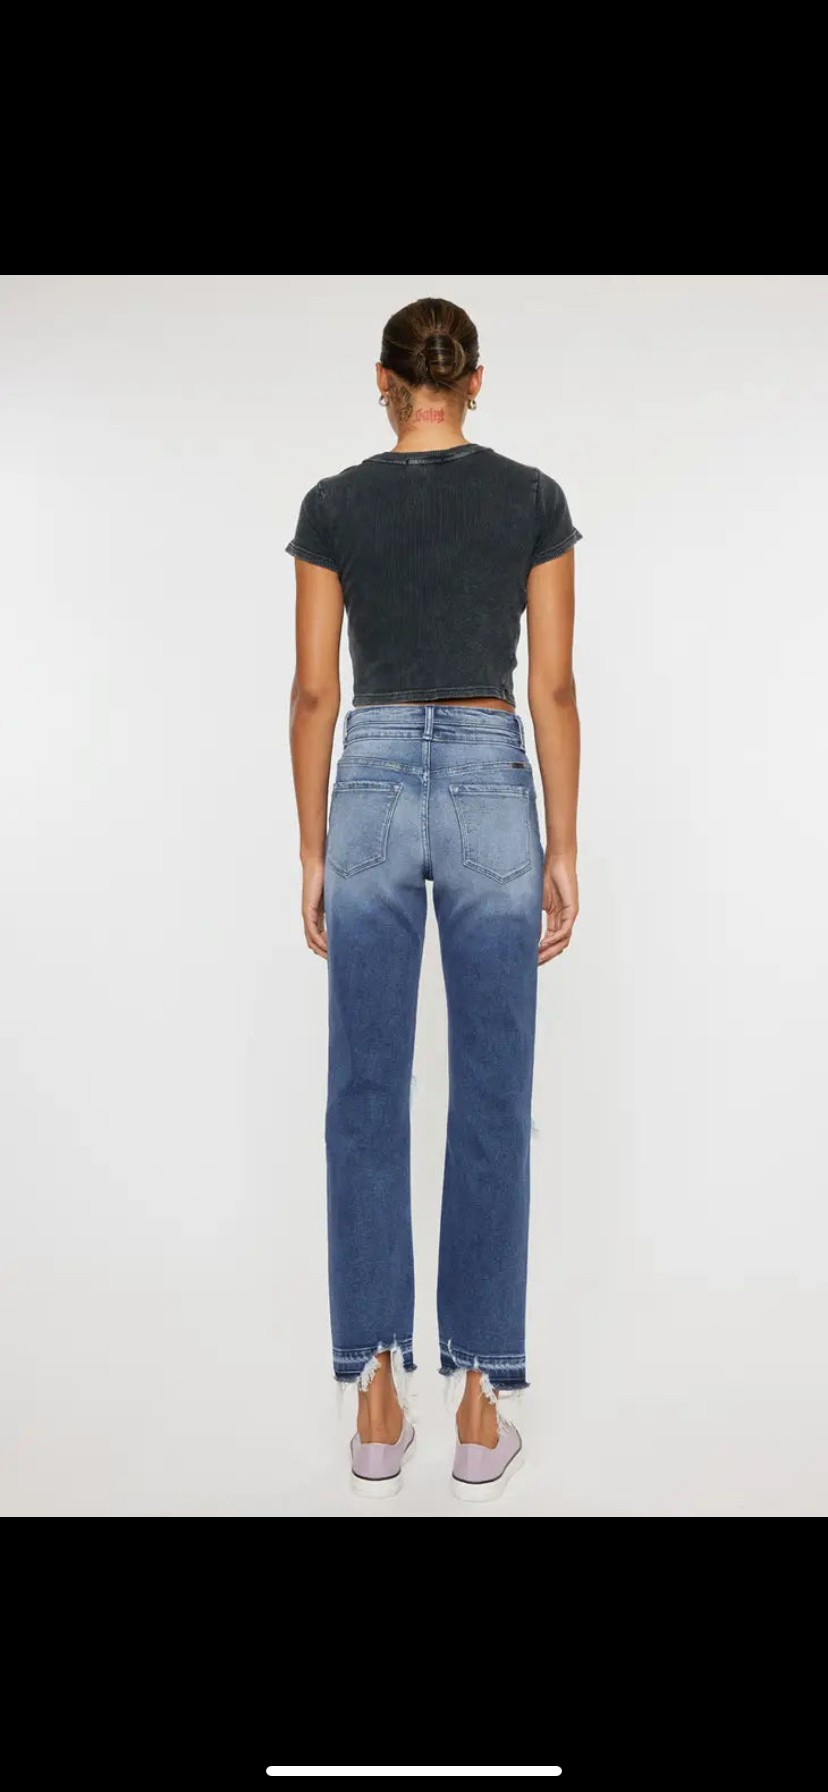 Kan Can Freedom Denim Jeans